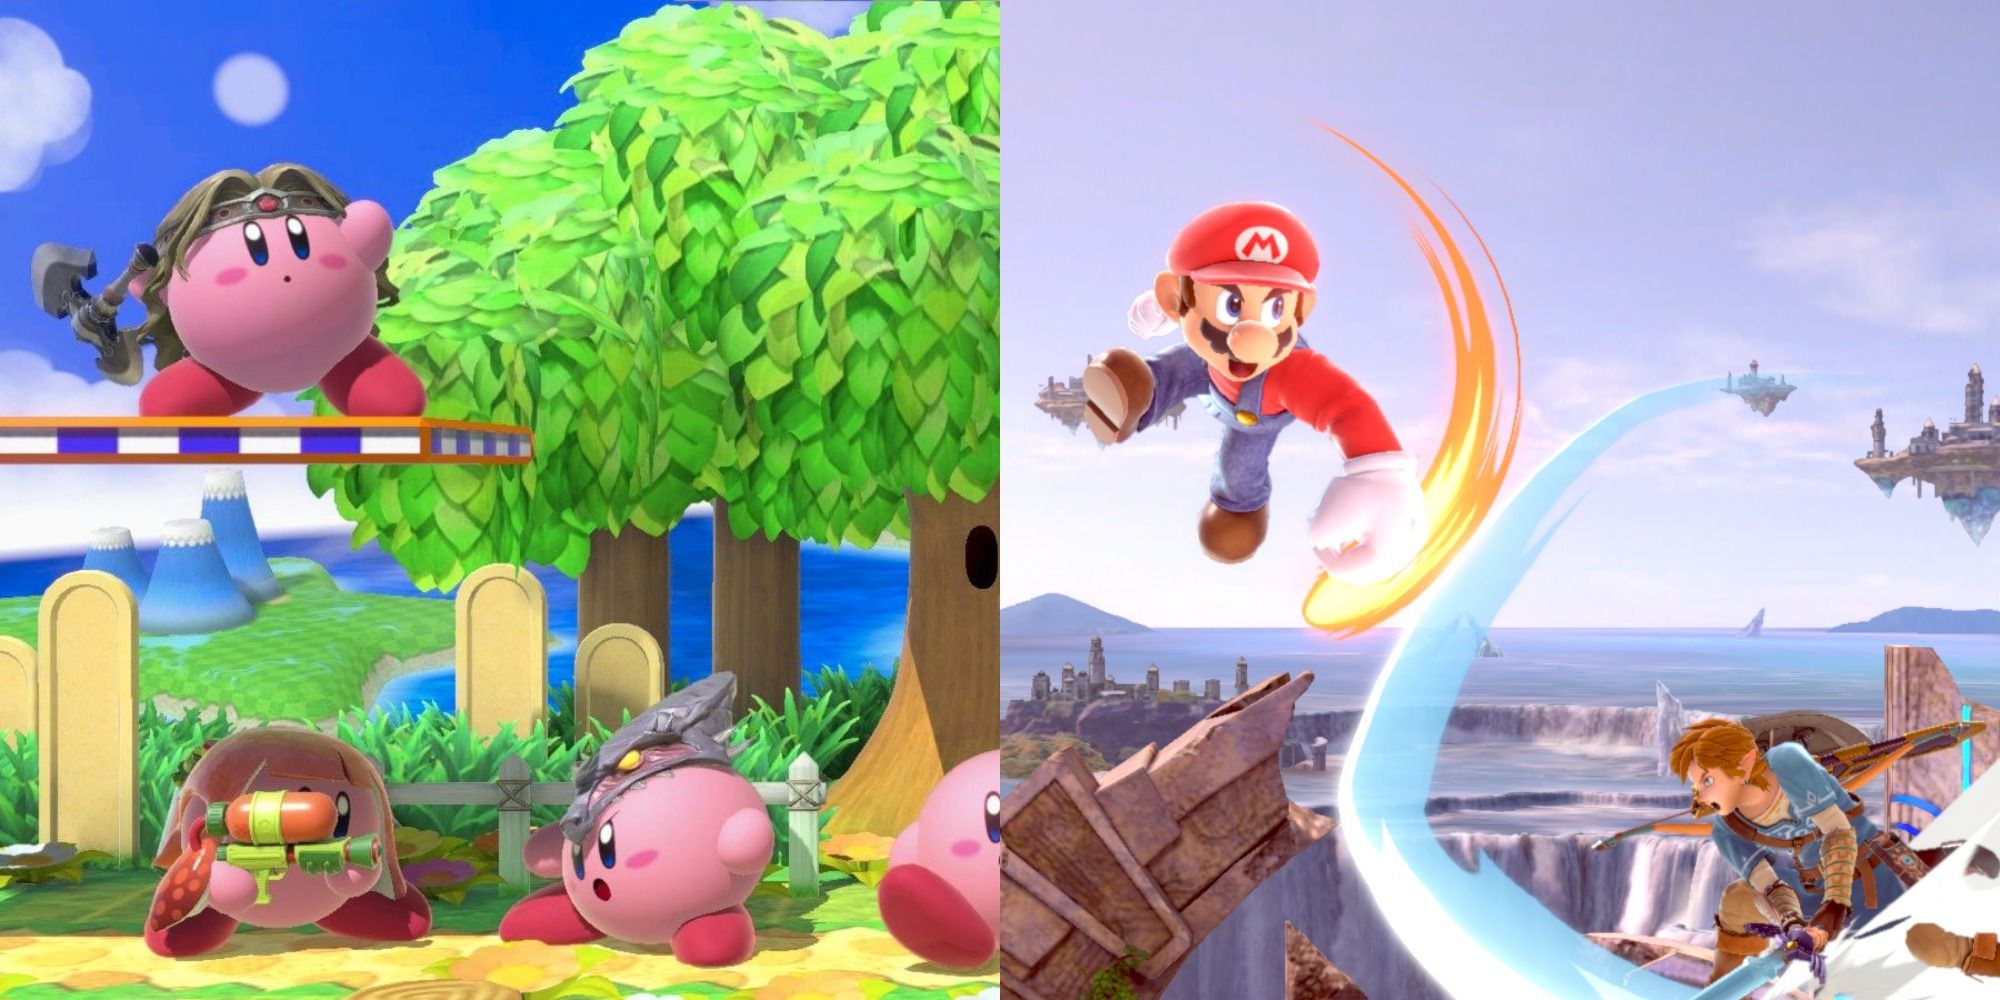 Split image of Kirby and Mario fighting in Super Smash Bros.